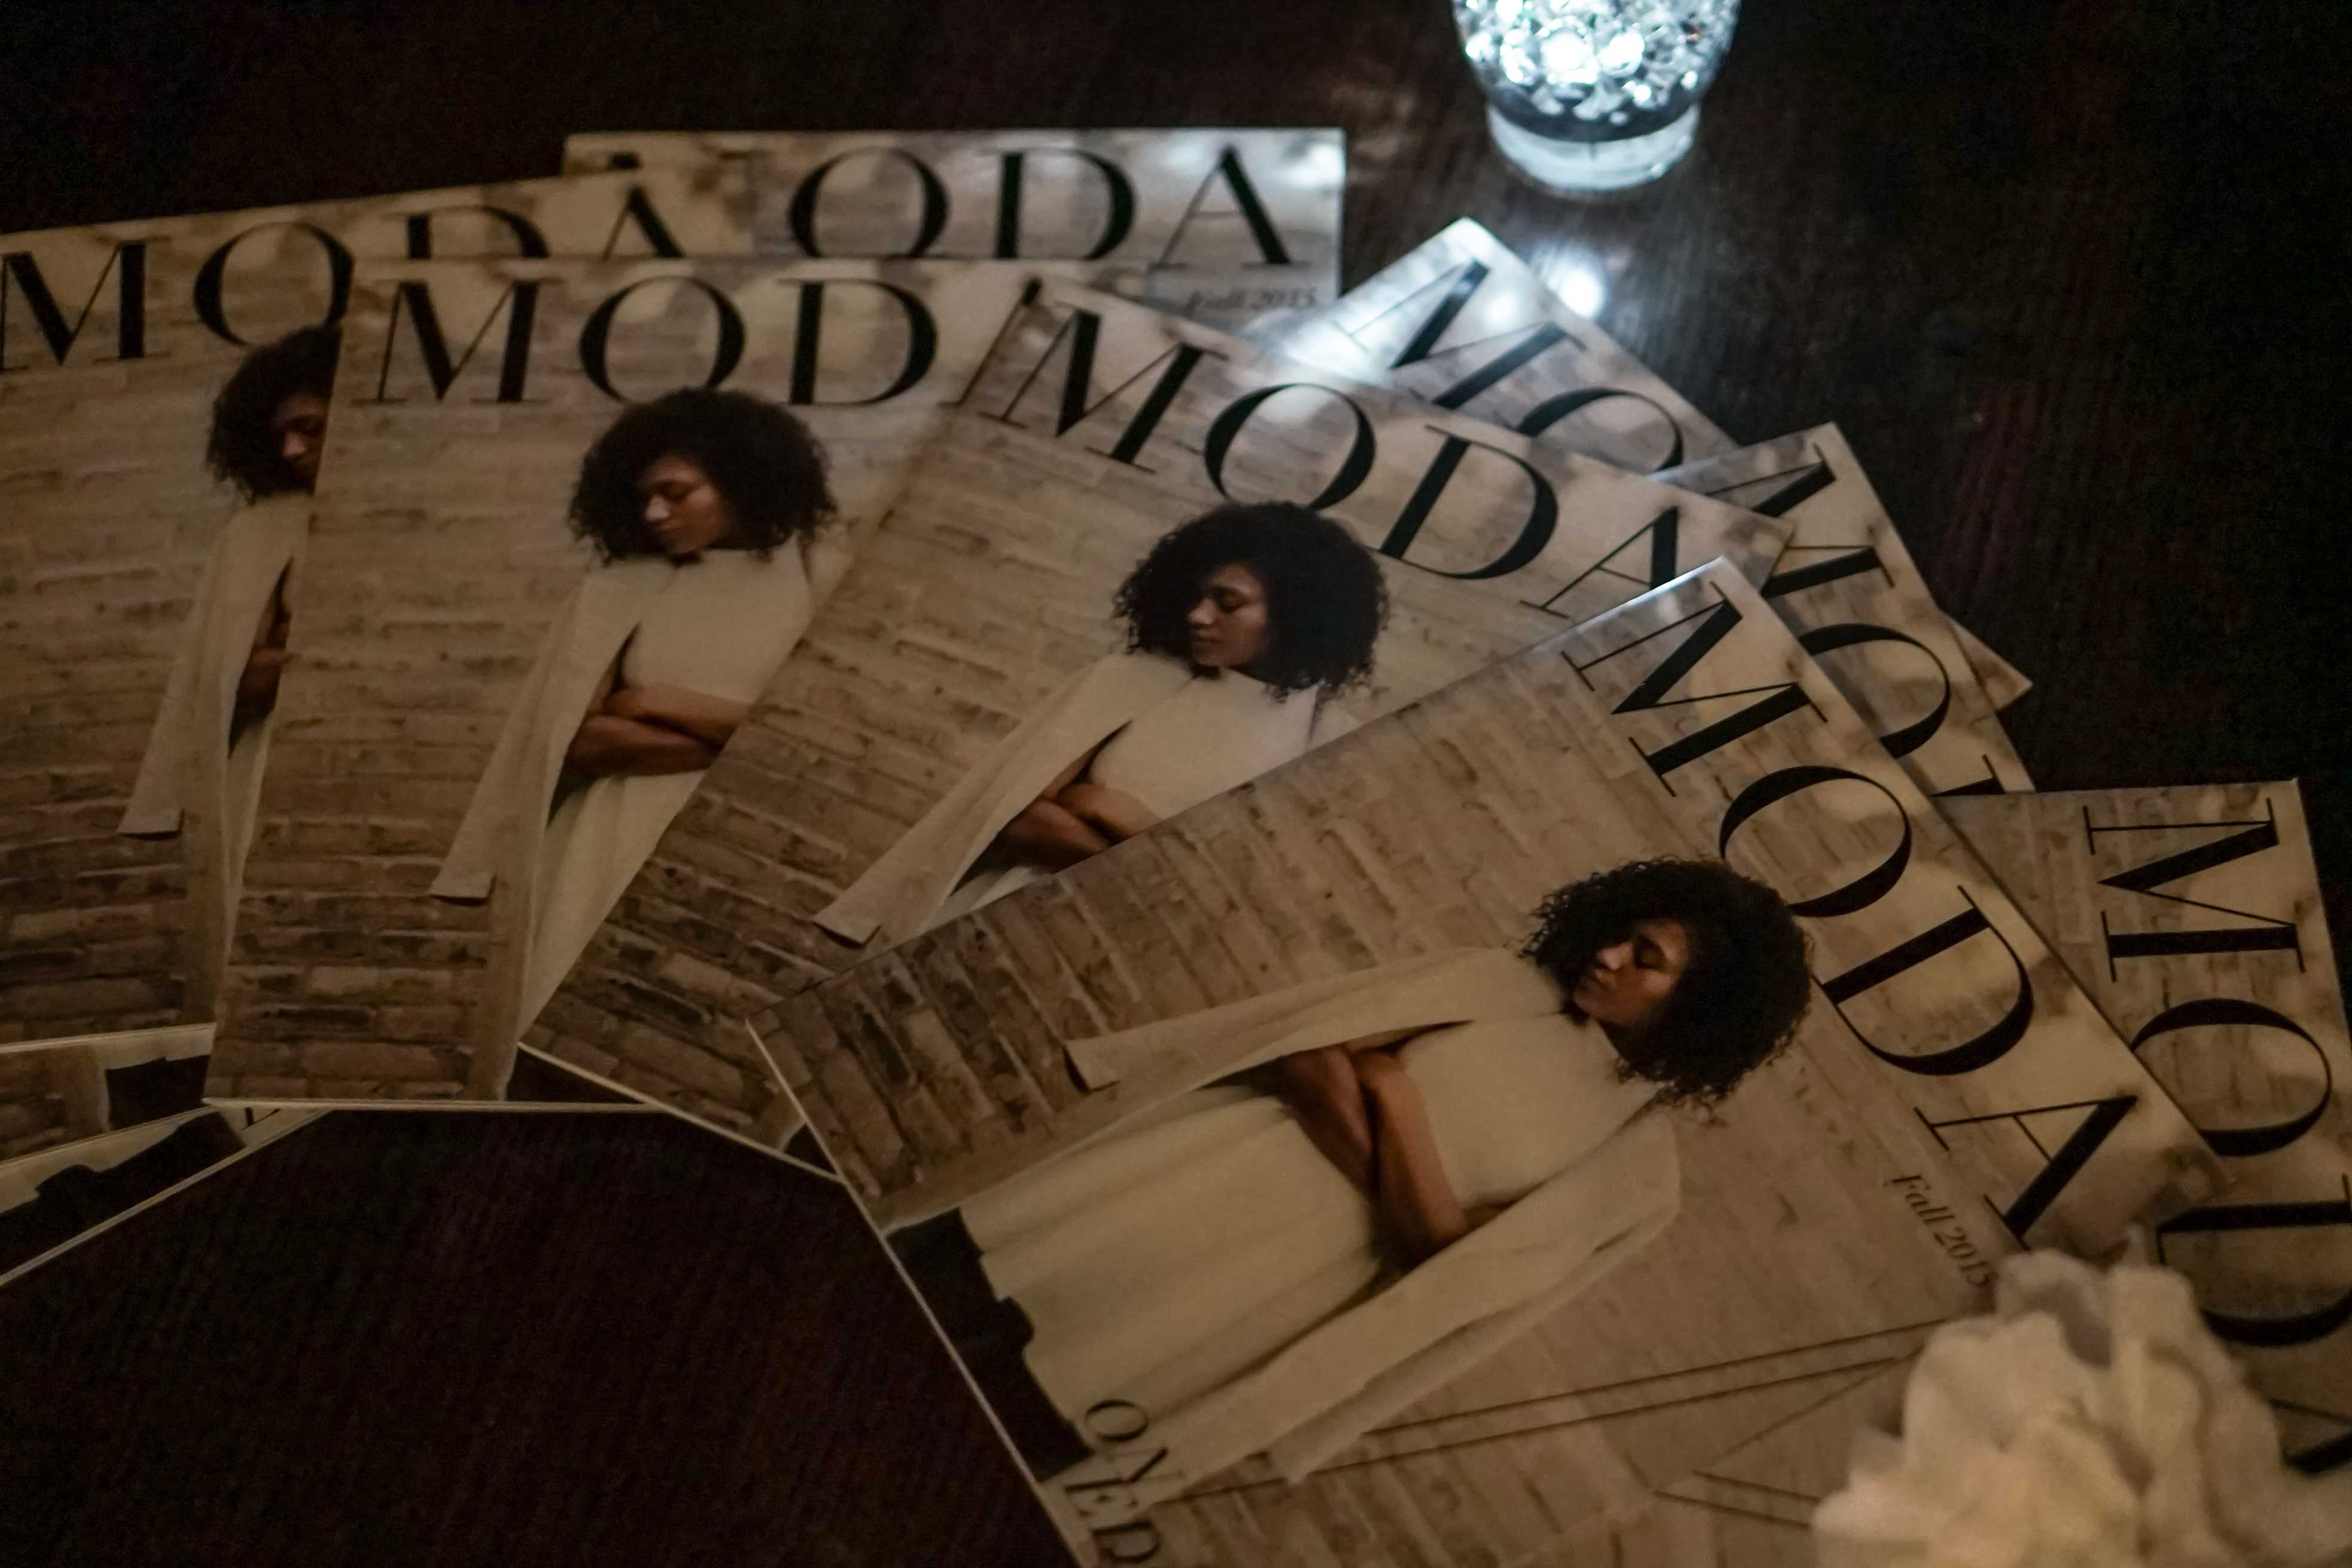 Moda Magazine addresses controversial 'Vicious' issue at town hall meeting,  promises structural changes · The Badger Herald